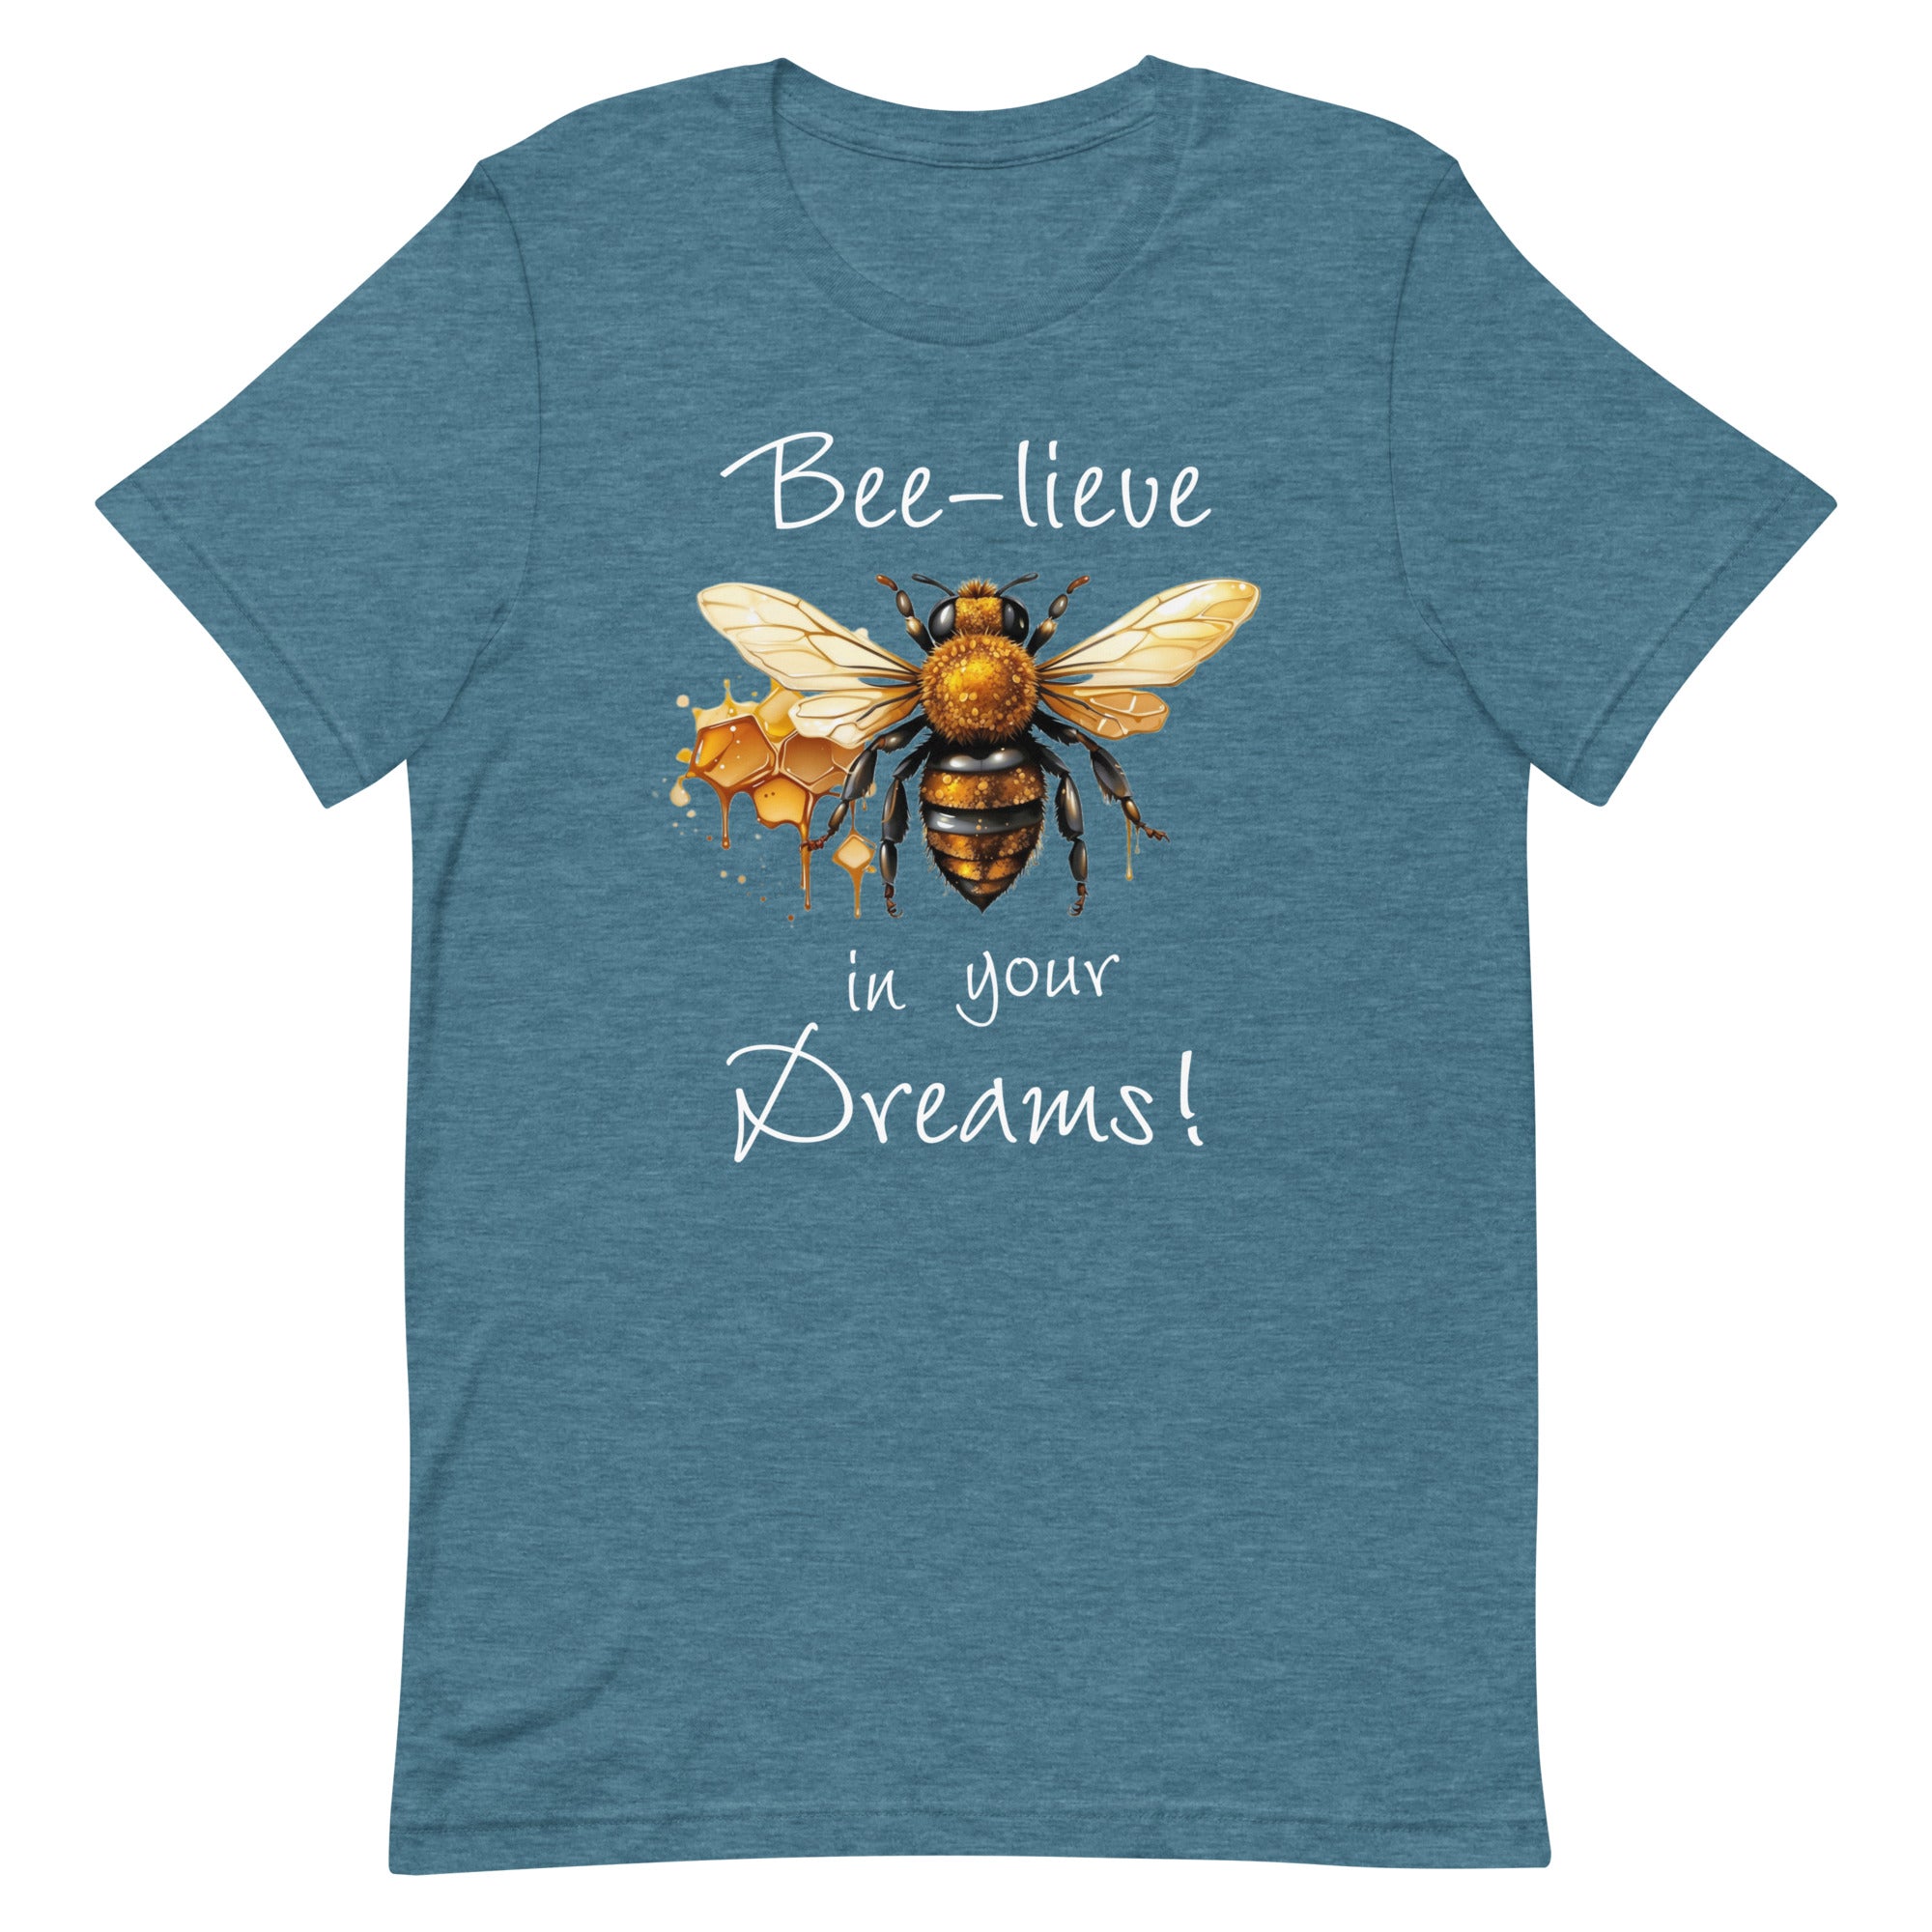 Bee-lieve in Your Dreams T-Shirt, Gift for Bee Lovers Heather Deep Teal S M XL L DenBox